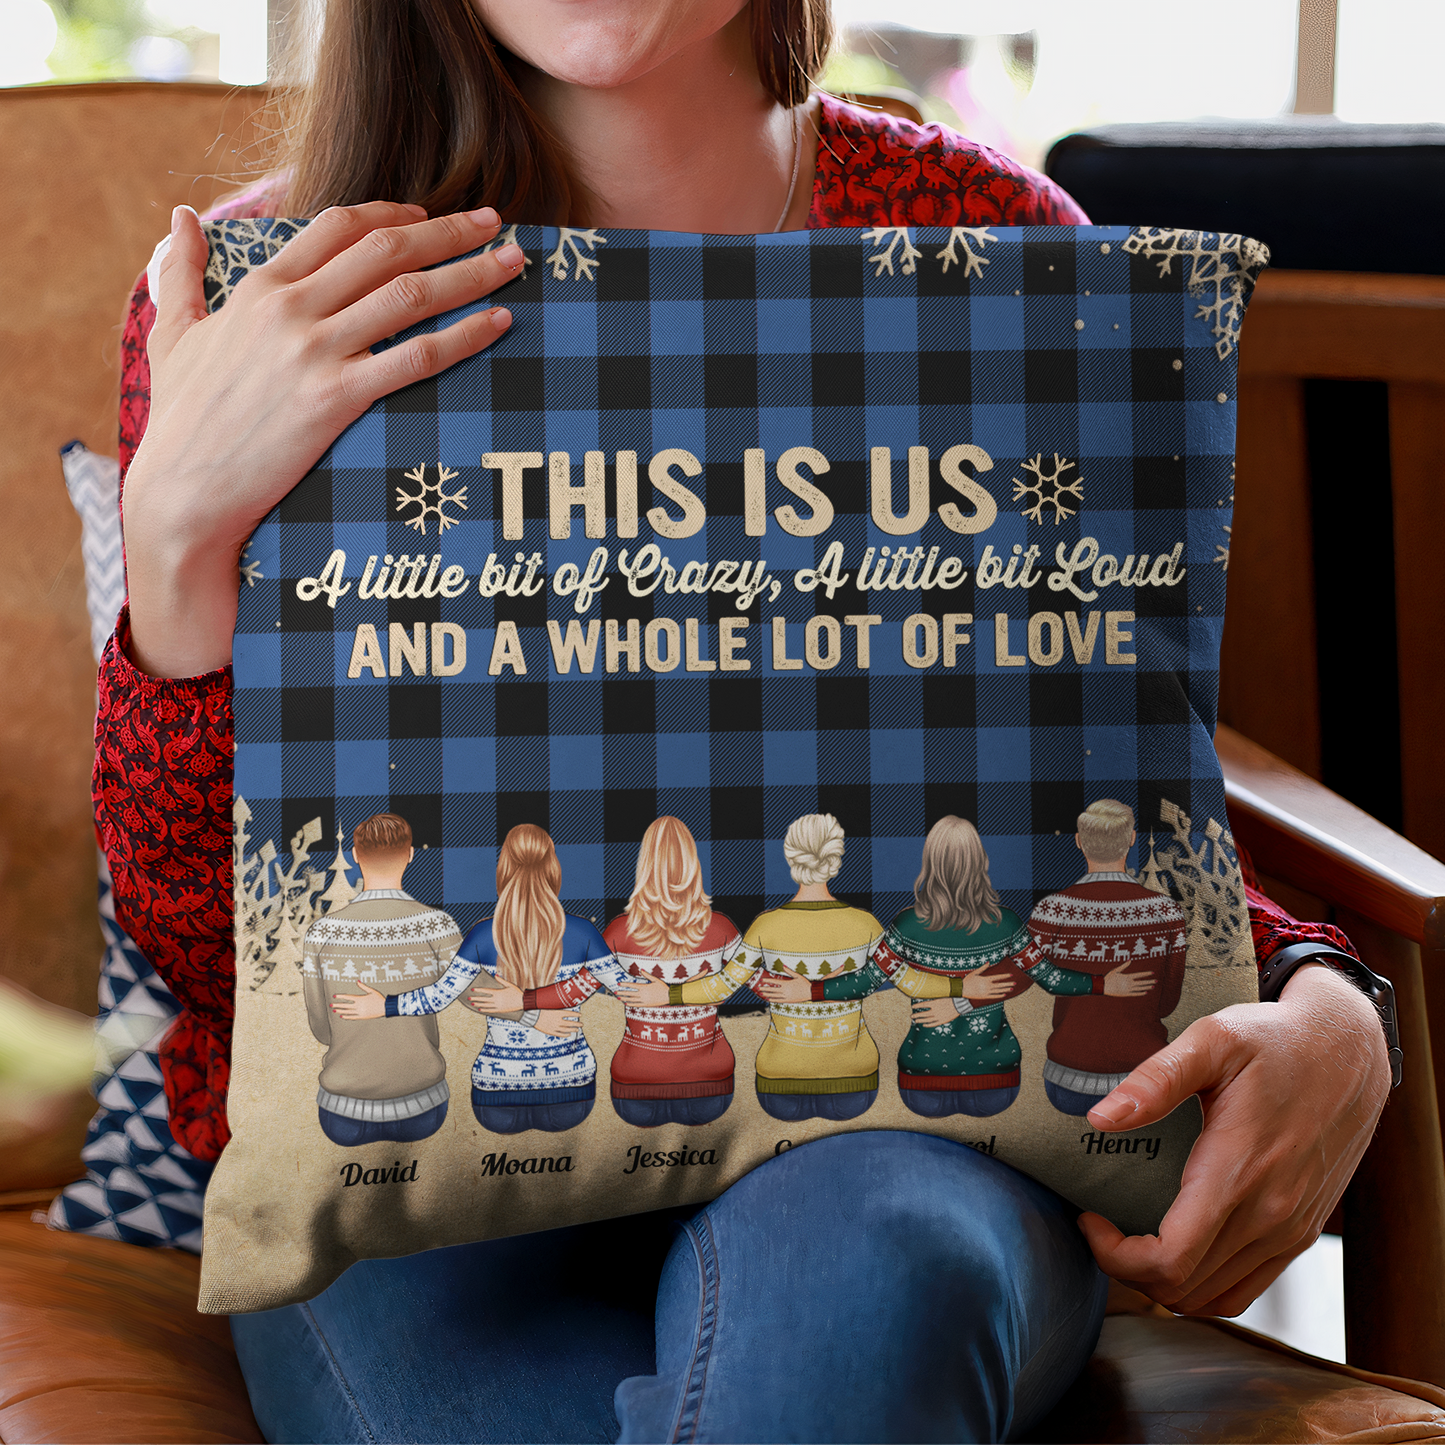 There Is No Greater Gift Than Brothers & Sisters - Personalized Pillow (Insert Included)